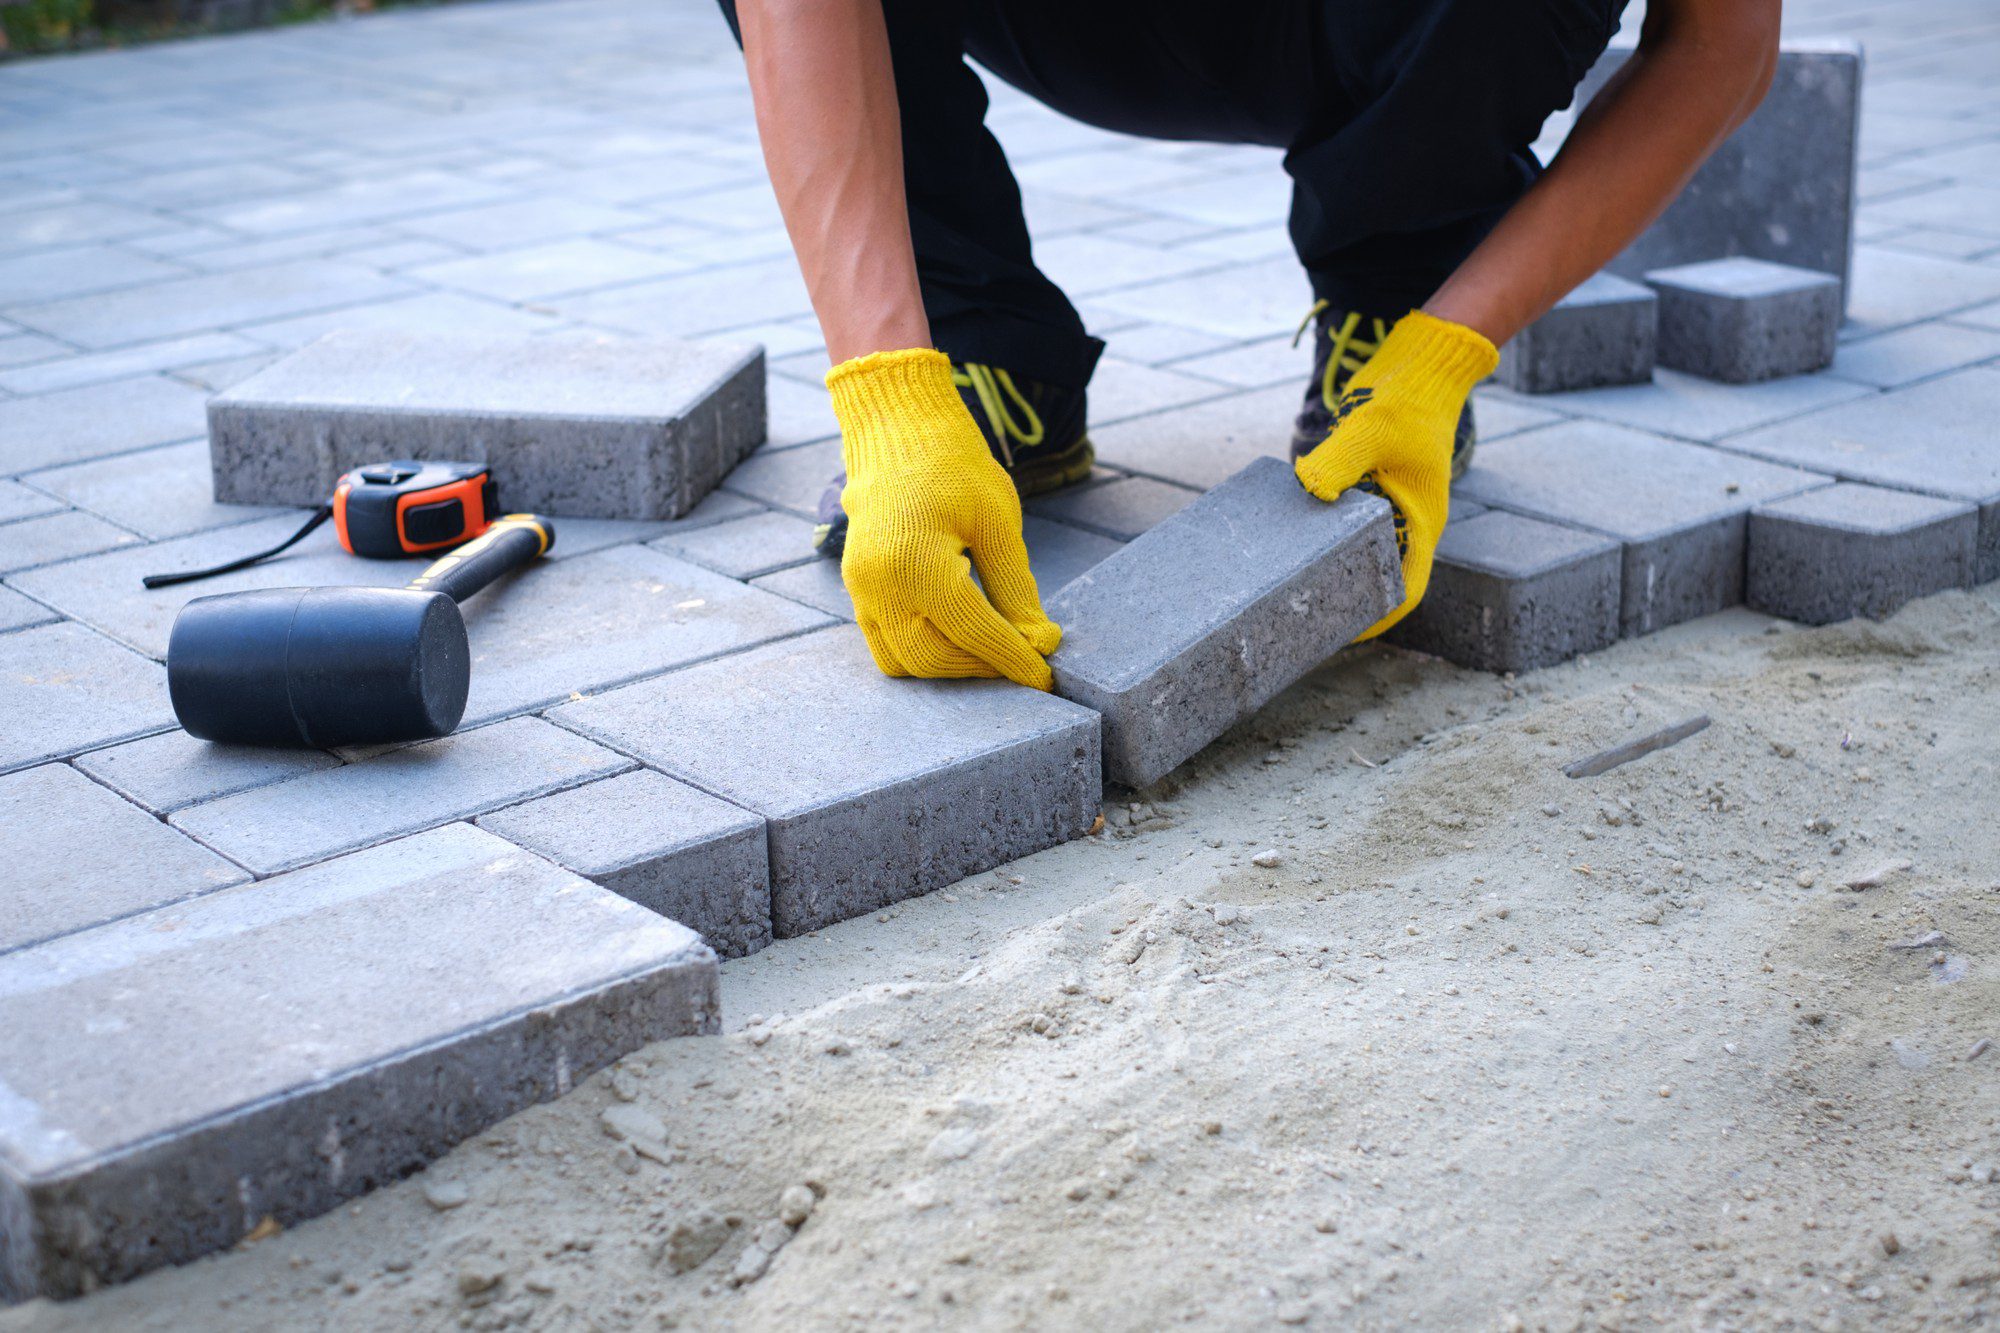 The image shows a person laying paving stones to create a path or pavement. The person is wearing yellow work gloves and is in the process of placing a gray rectangular paving stone onto the sandy ground. There is a rubber mallet and a tape measure lying on the already laid paving stones, indicating that the work is precise and requires measurement. The arranged stones create a pattern, and the unfinished edge suggests that the work is in progress. It's a snapshot of construction or landscaping work.